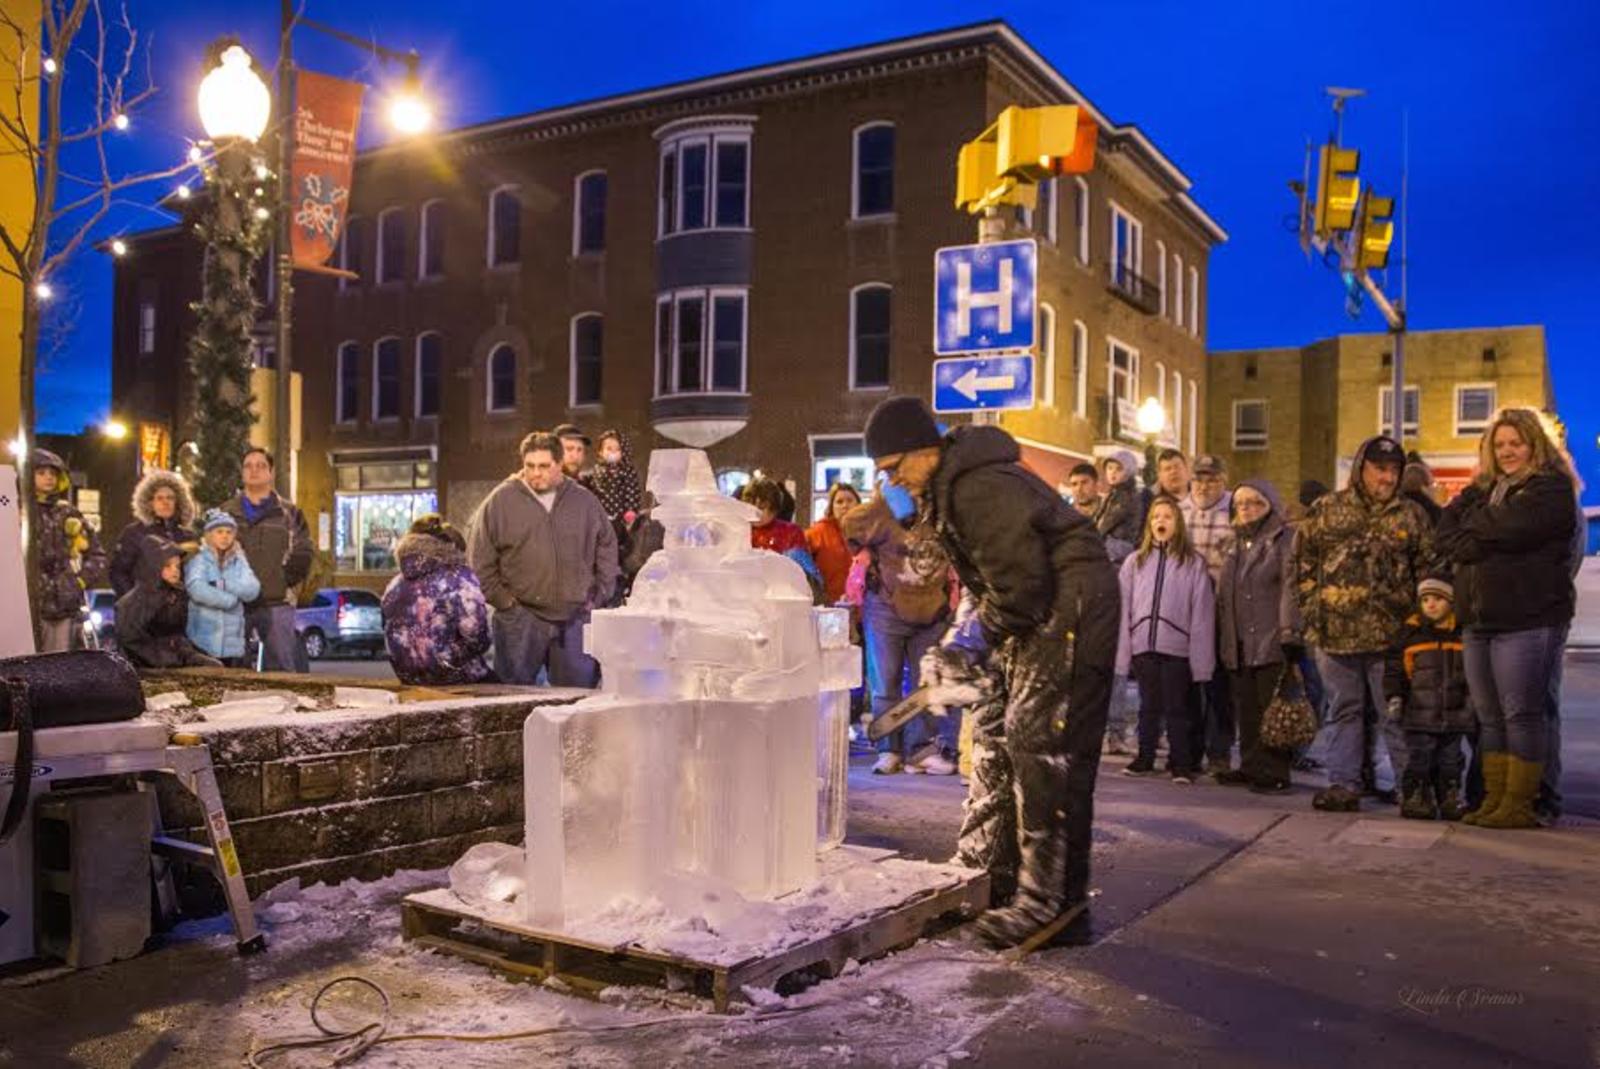 Ice carving demonstrations always draw a crowd at Fire & Ice in Somerset